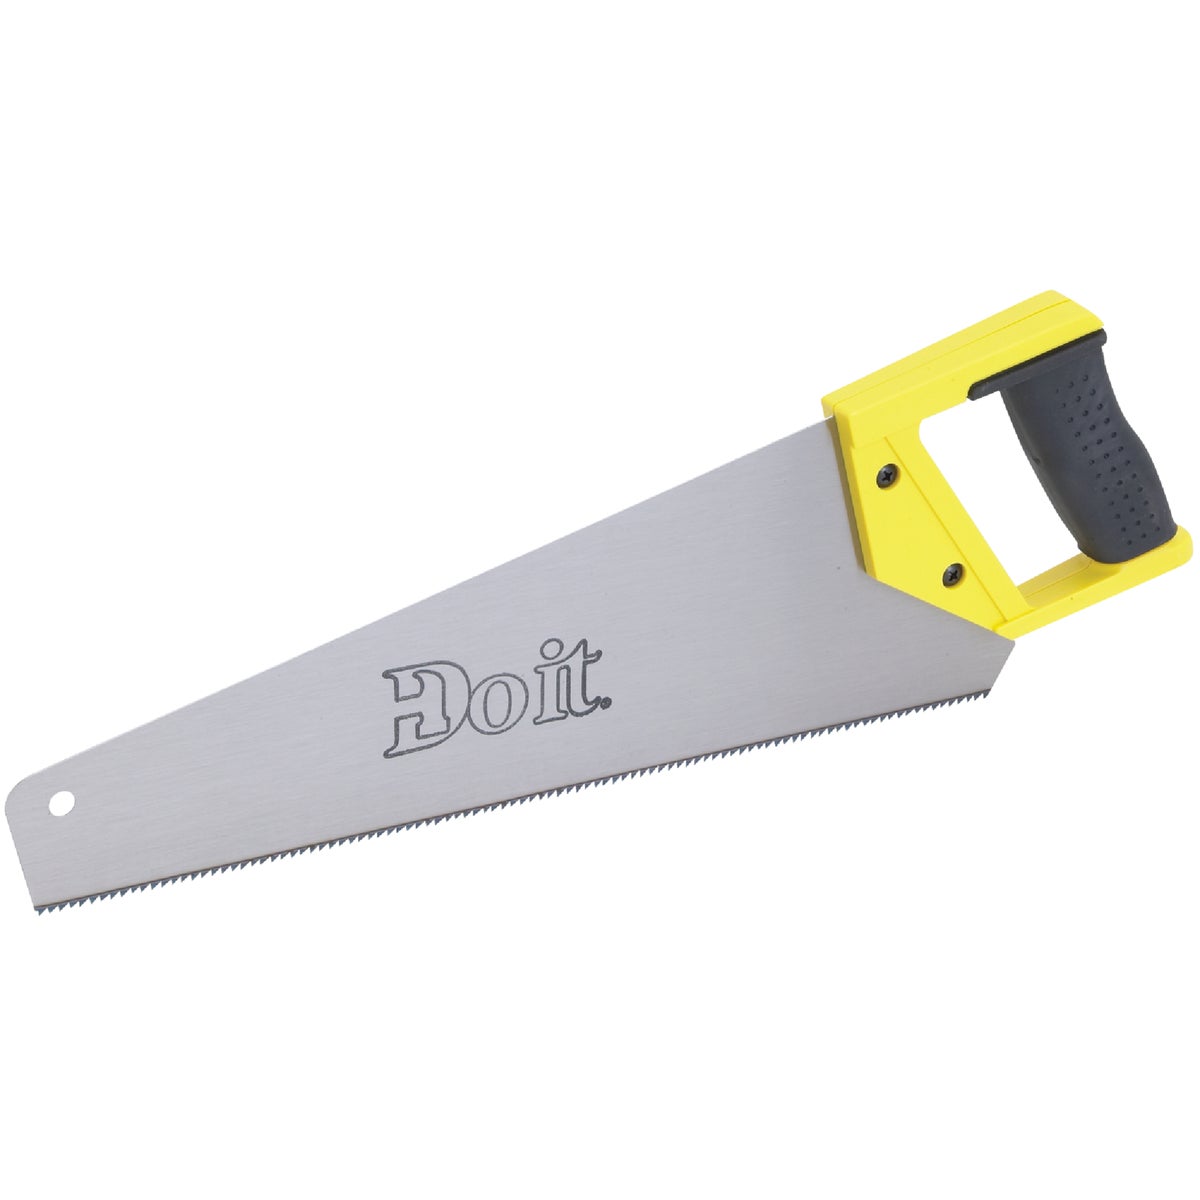 Item 330396, Hand Saw with plastic handle and rubber-grip. Handle features both 45 deg.